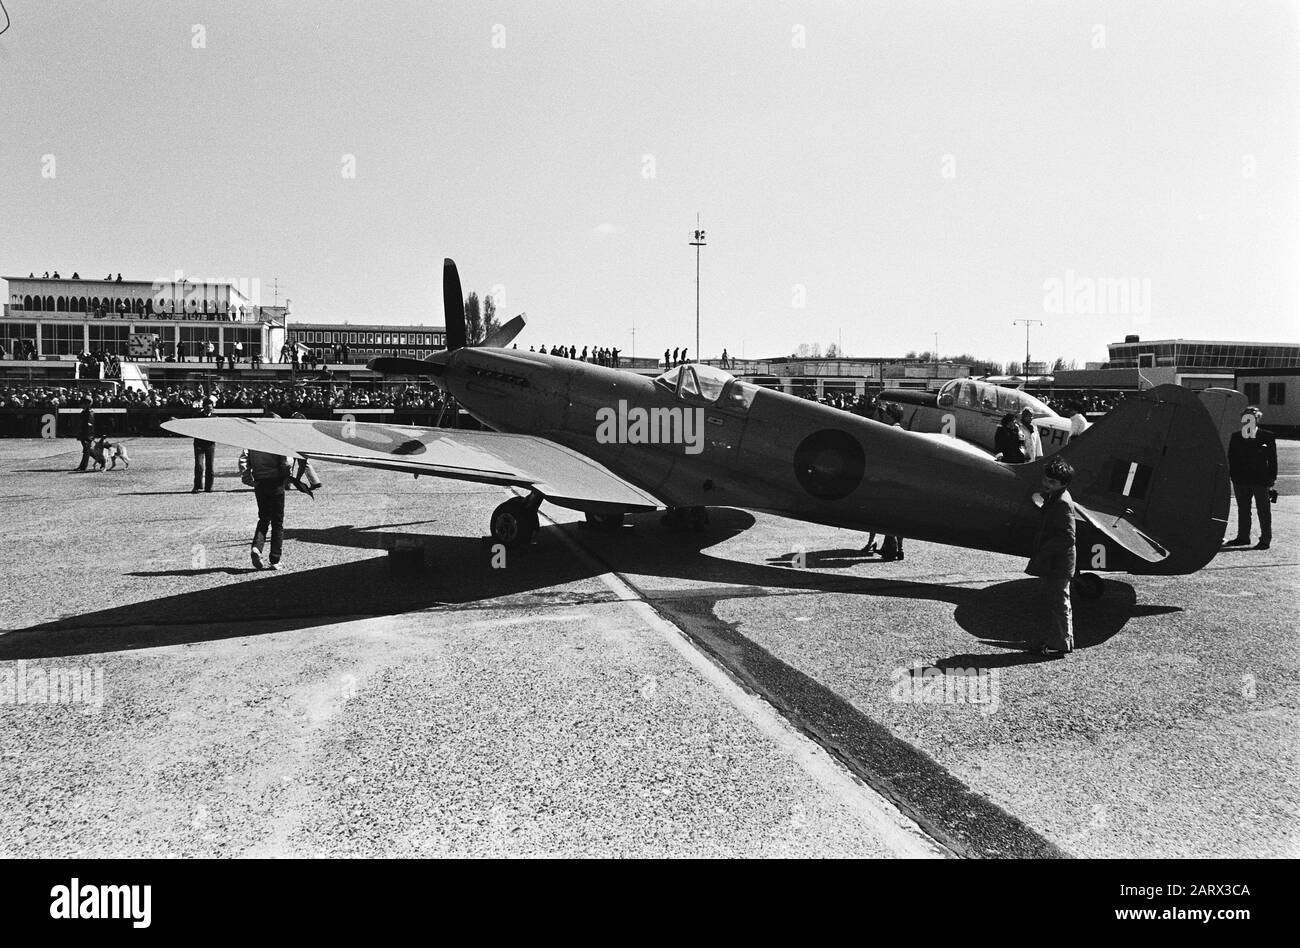 Exhibition of old warplanes at Schiphol; Spitfire PR Mk XIX photo explorer Date: 5 May 1980 Location: Noord-Holland, Schiphol Keywords: aviation, exhibitions, aircraft Institution name: Spitfire Stock Photo